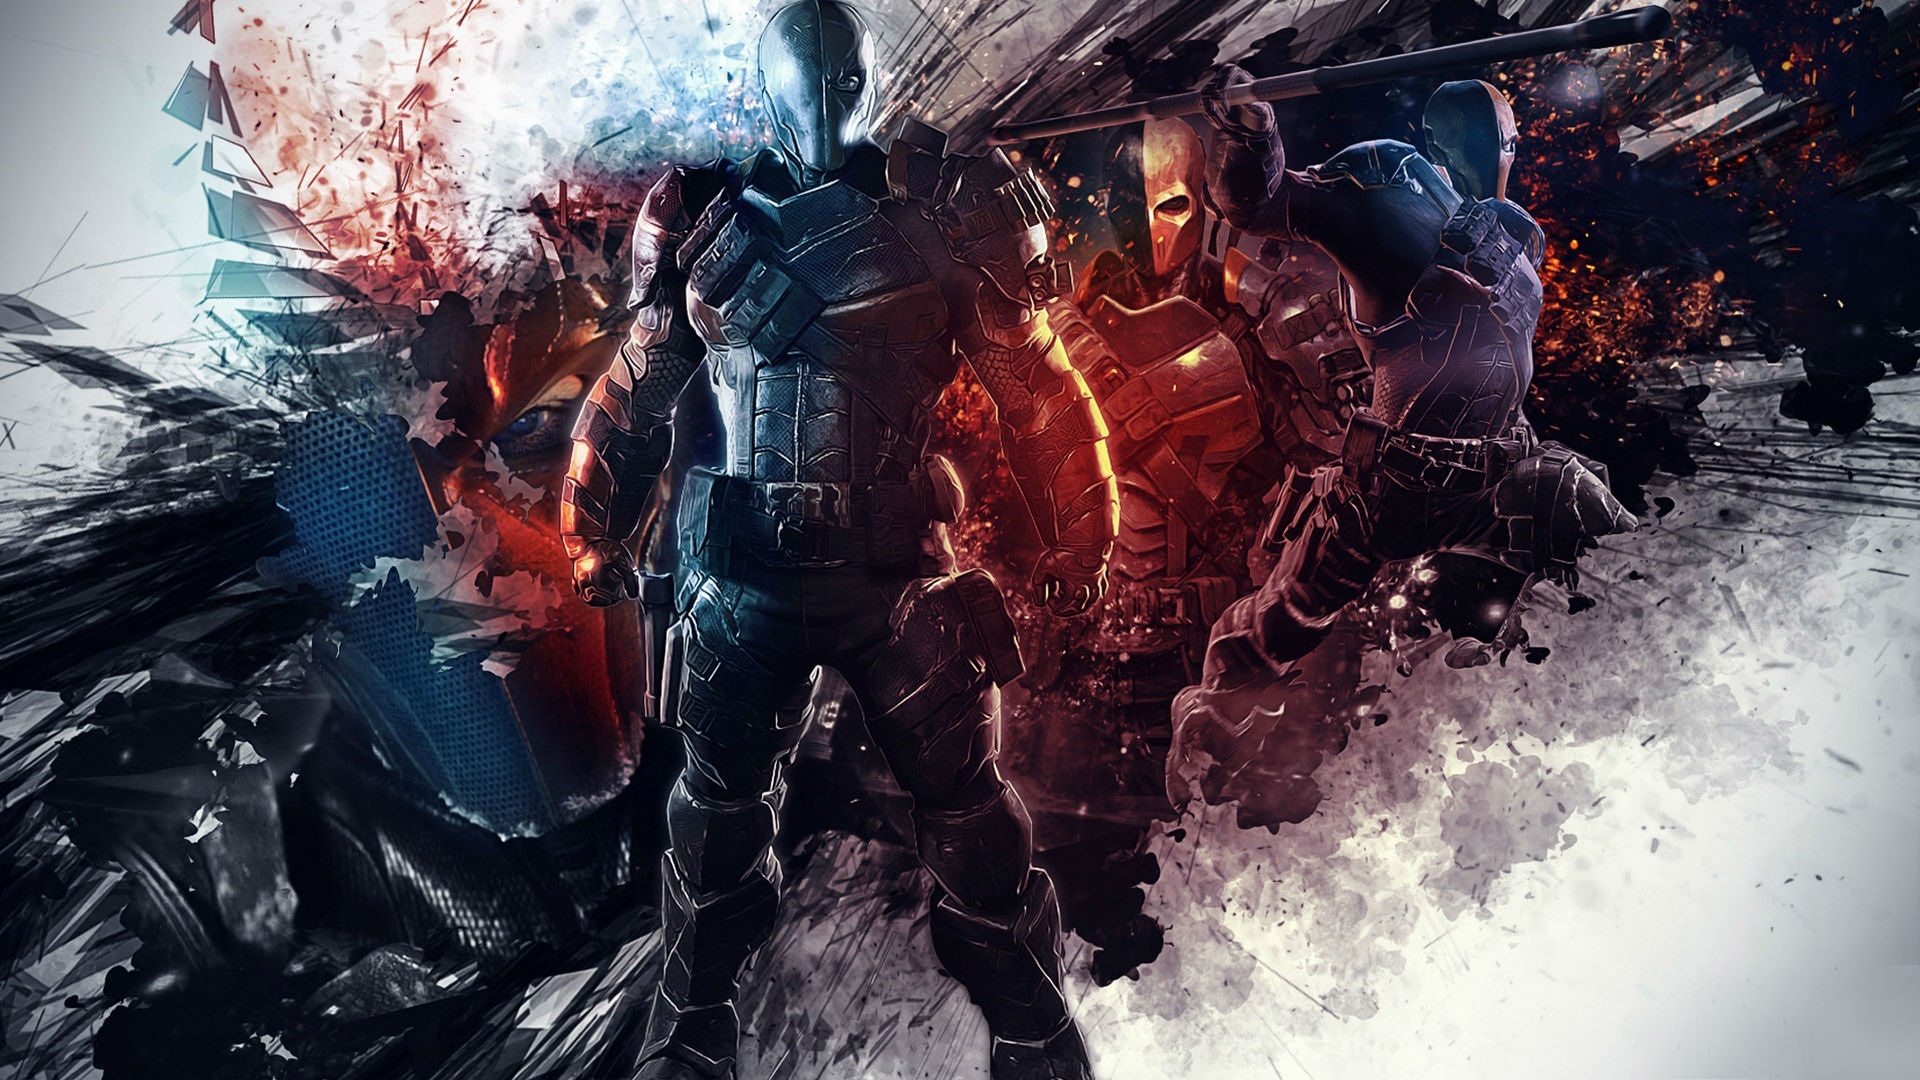 deathstroke wallpaper,action adventure game,pc game,fictional character,cg artwork,games